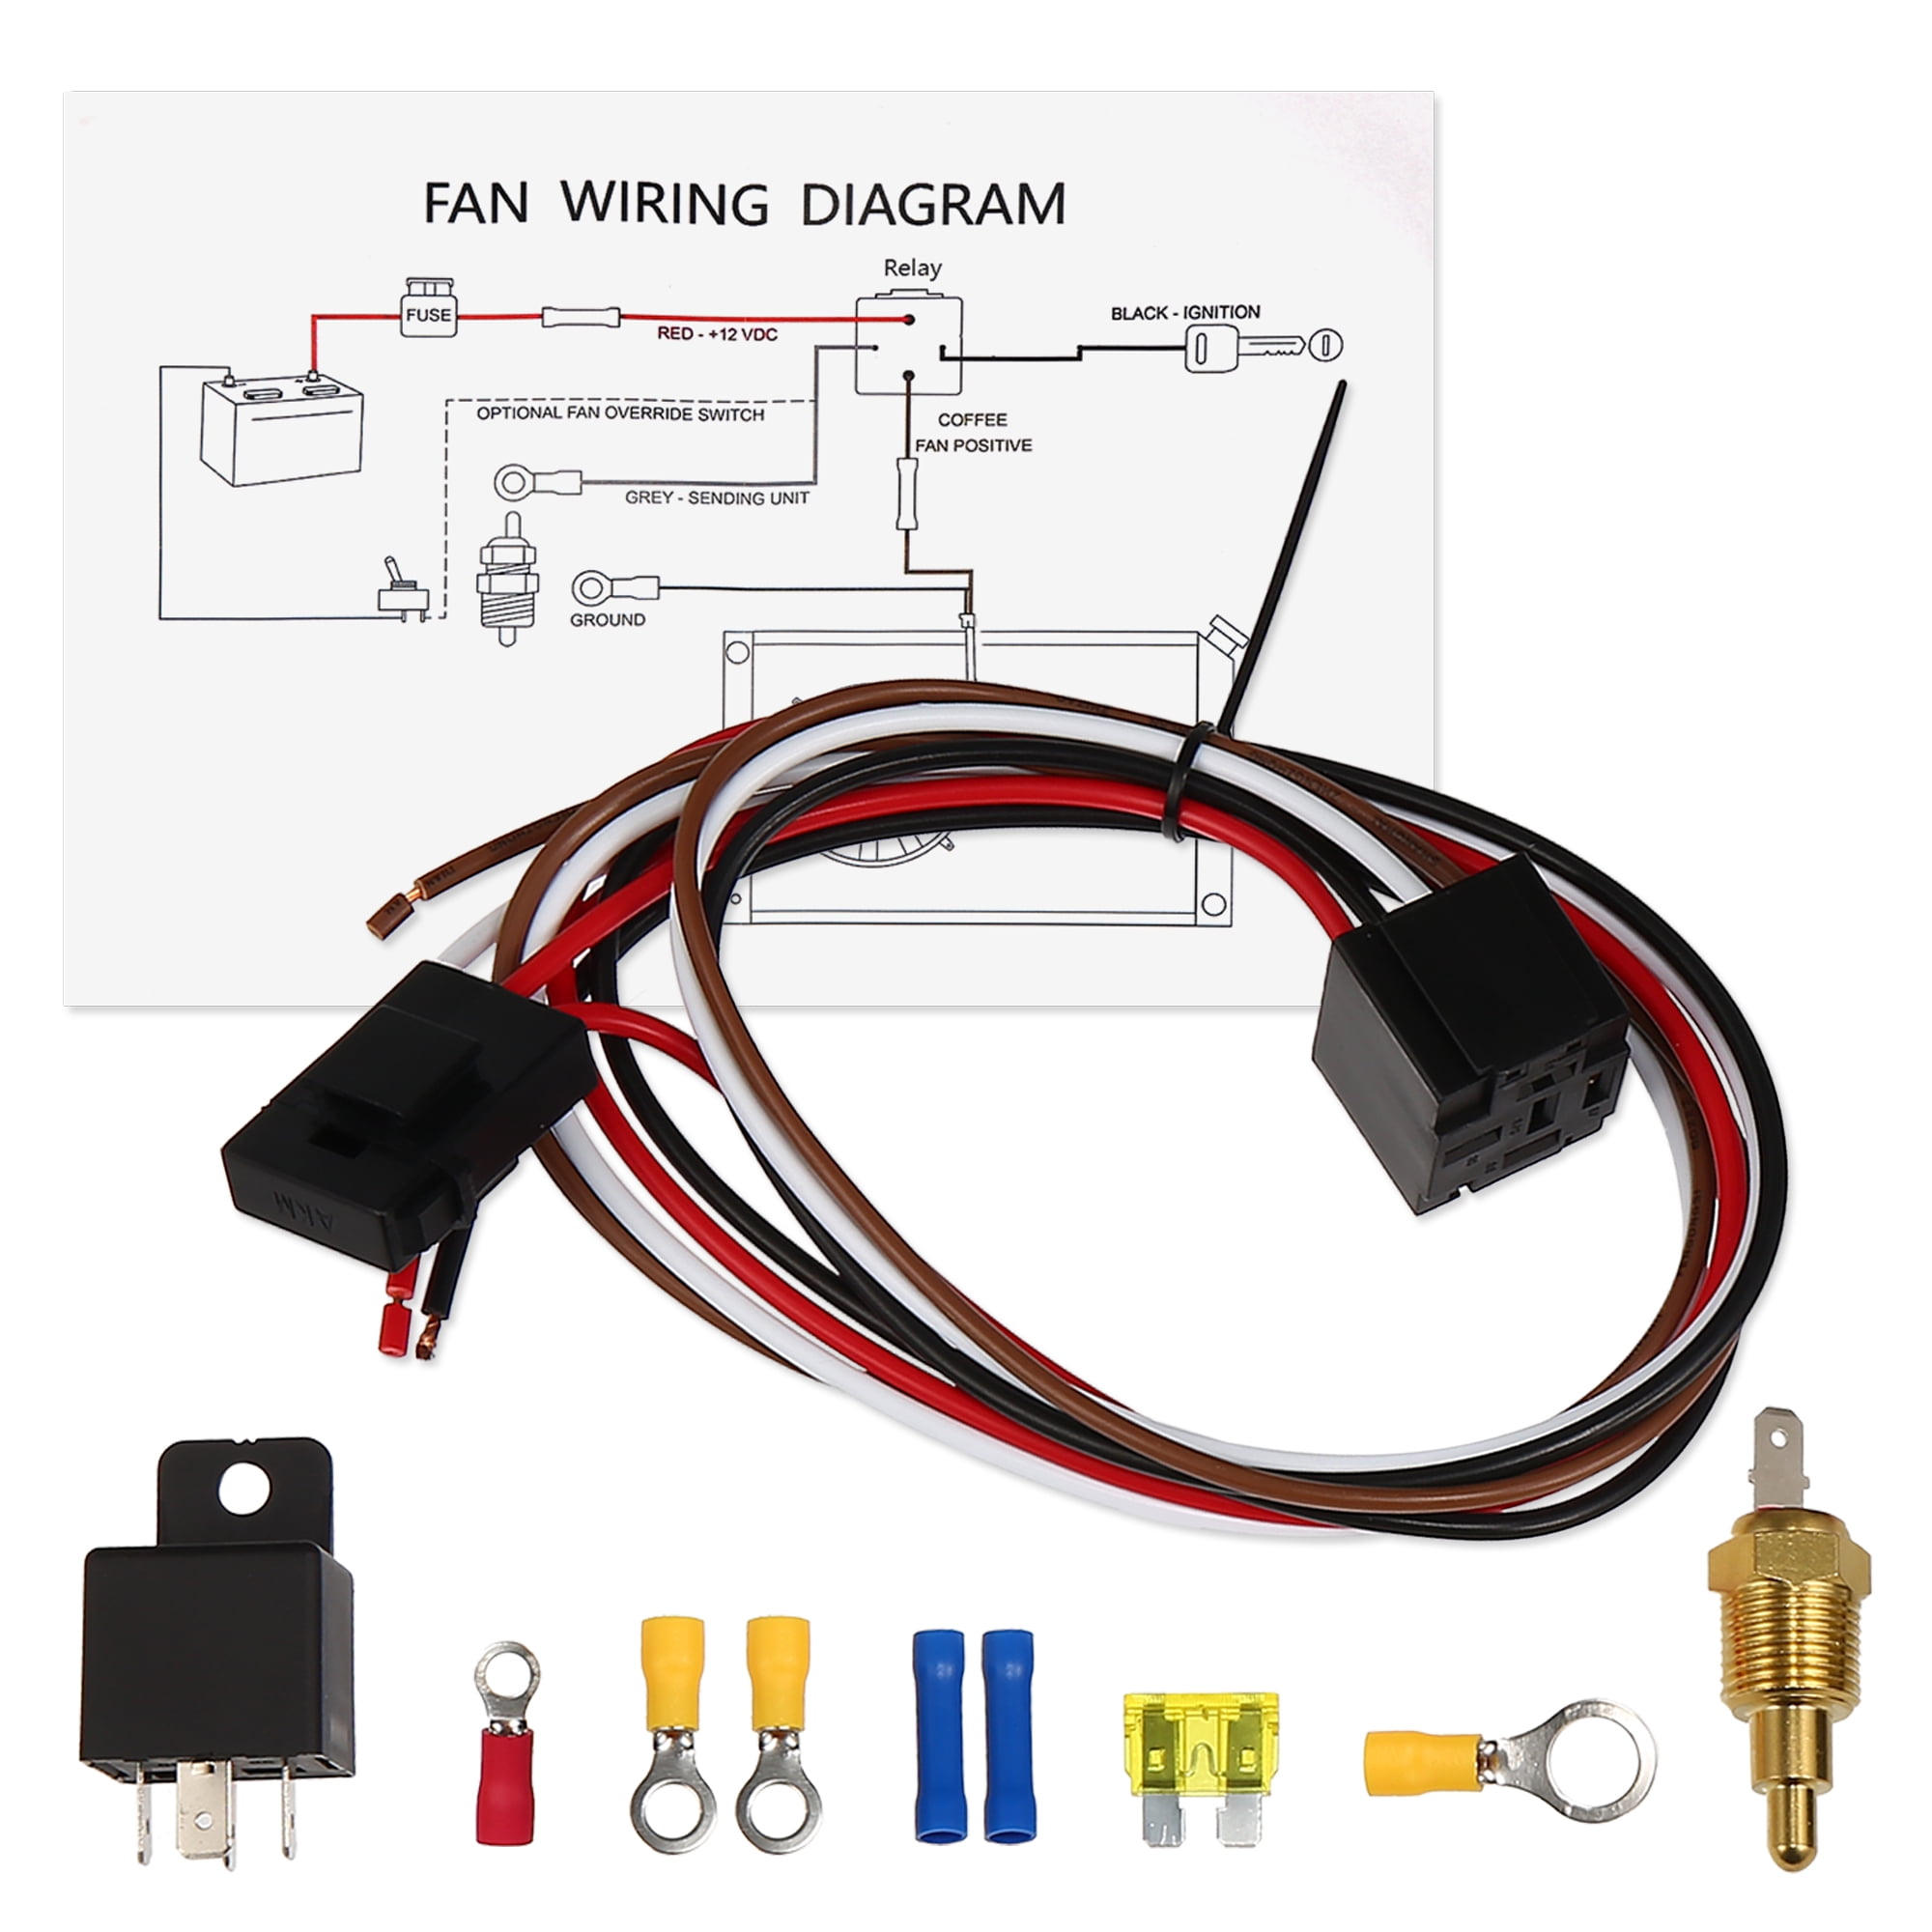 Electric Fan Relay Kit with 185'F on-175'F off Thread-In Probe Radiator Electric Cooling Fan Wiring Kit Set - Walmart.com